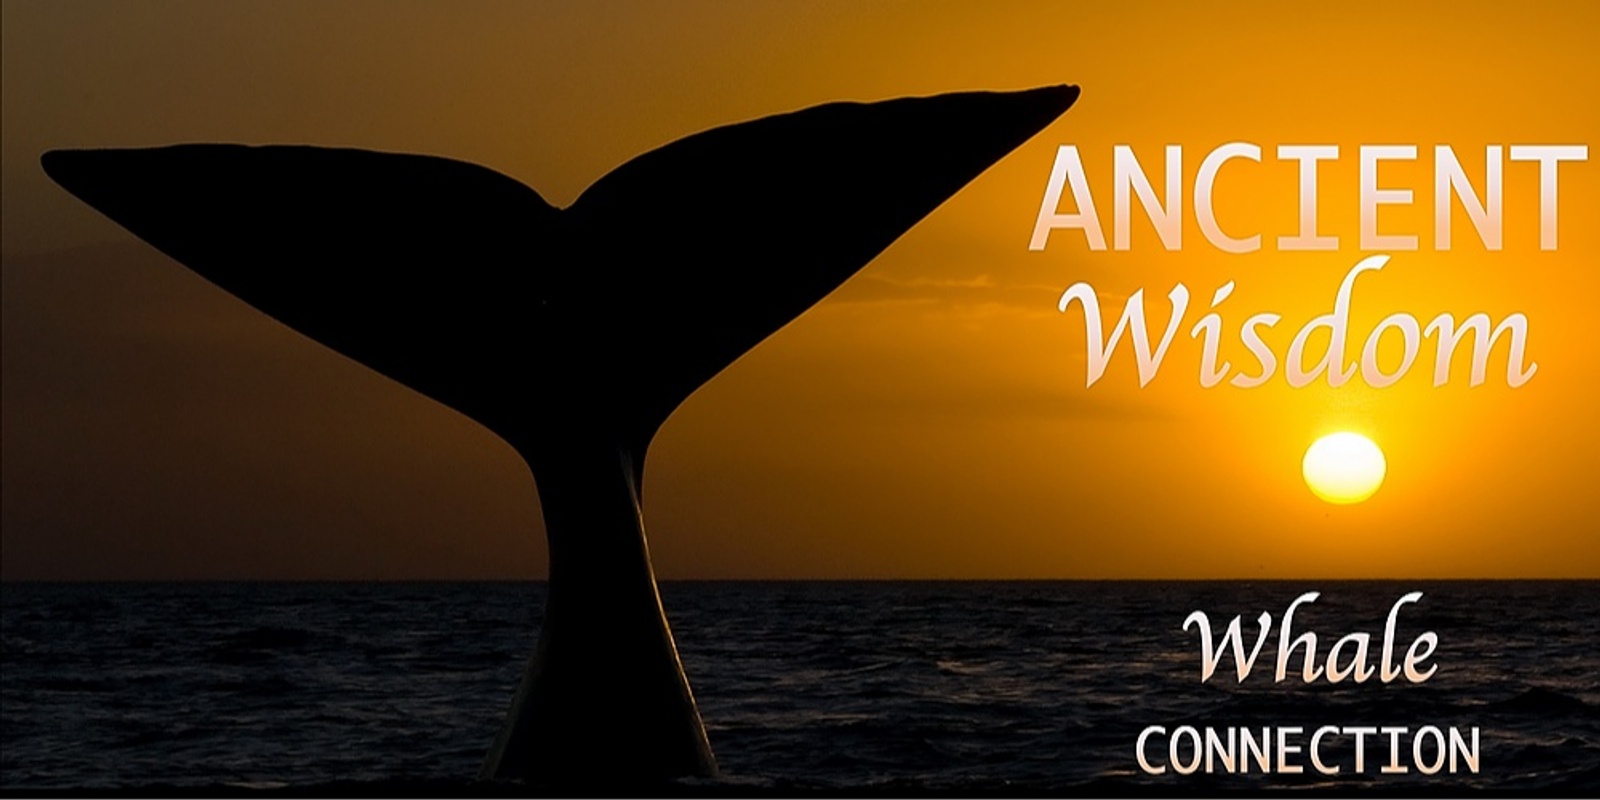 Banner image for BURLEIGH HEADS - Whale Lovers Sunrise Ancient Wisdom Whale Connection Workshop